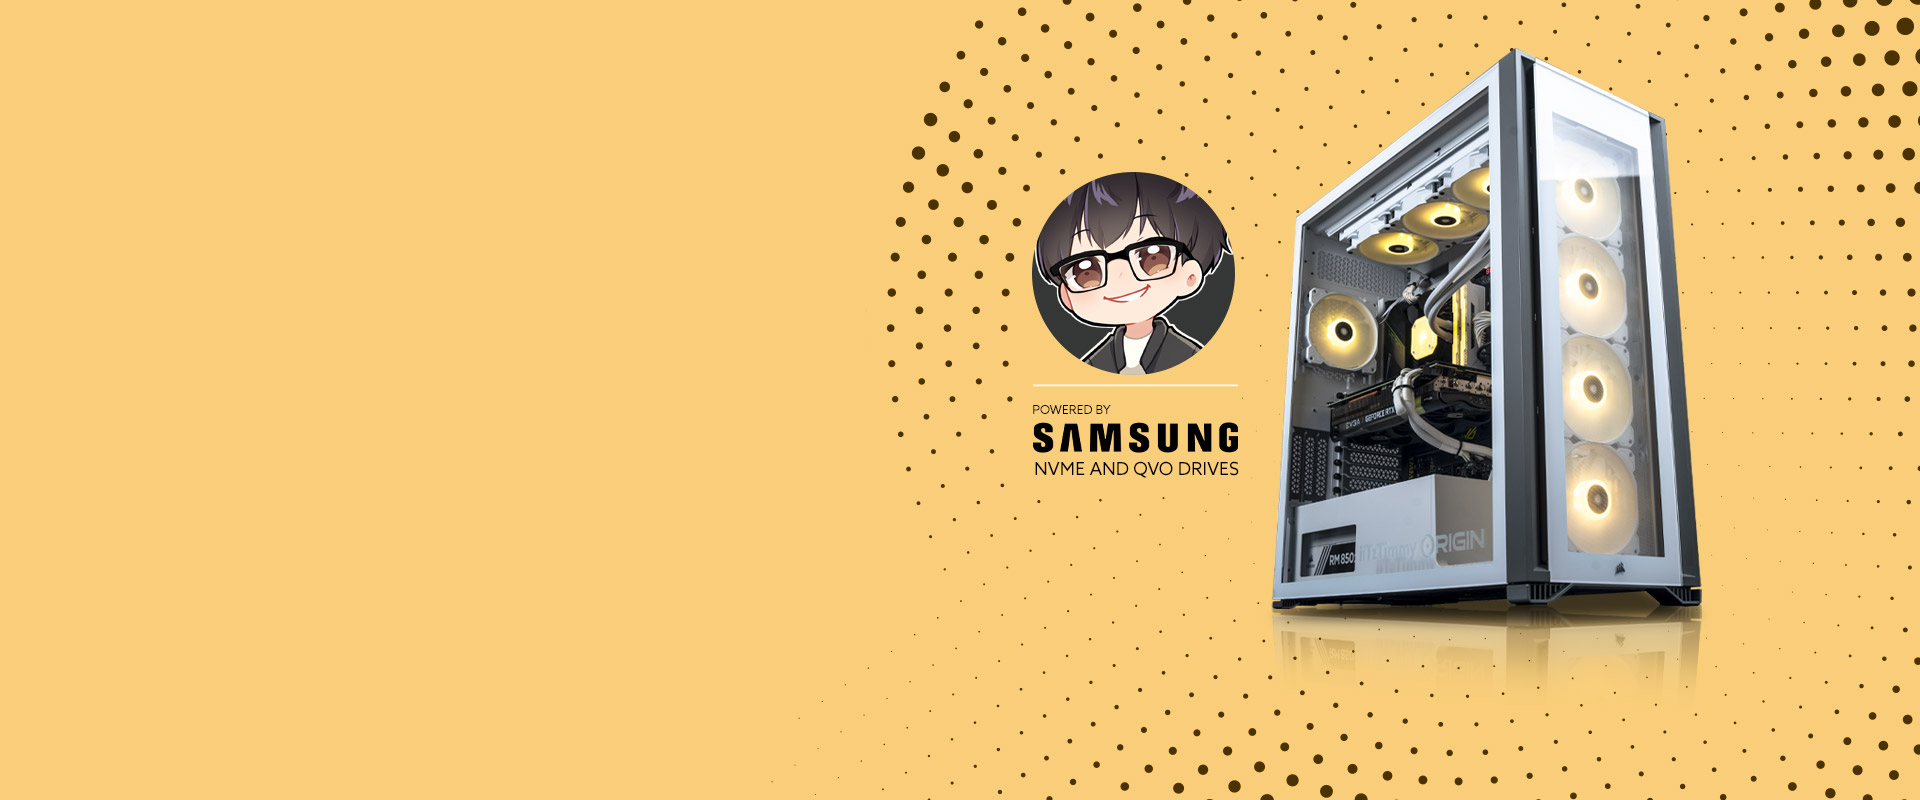 We’ve upgraded iiTzTimmy with a custom GENESIS 7000X desktop for high end gaming powered Samsung NVME and QVO Drives